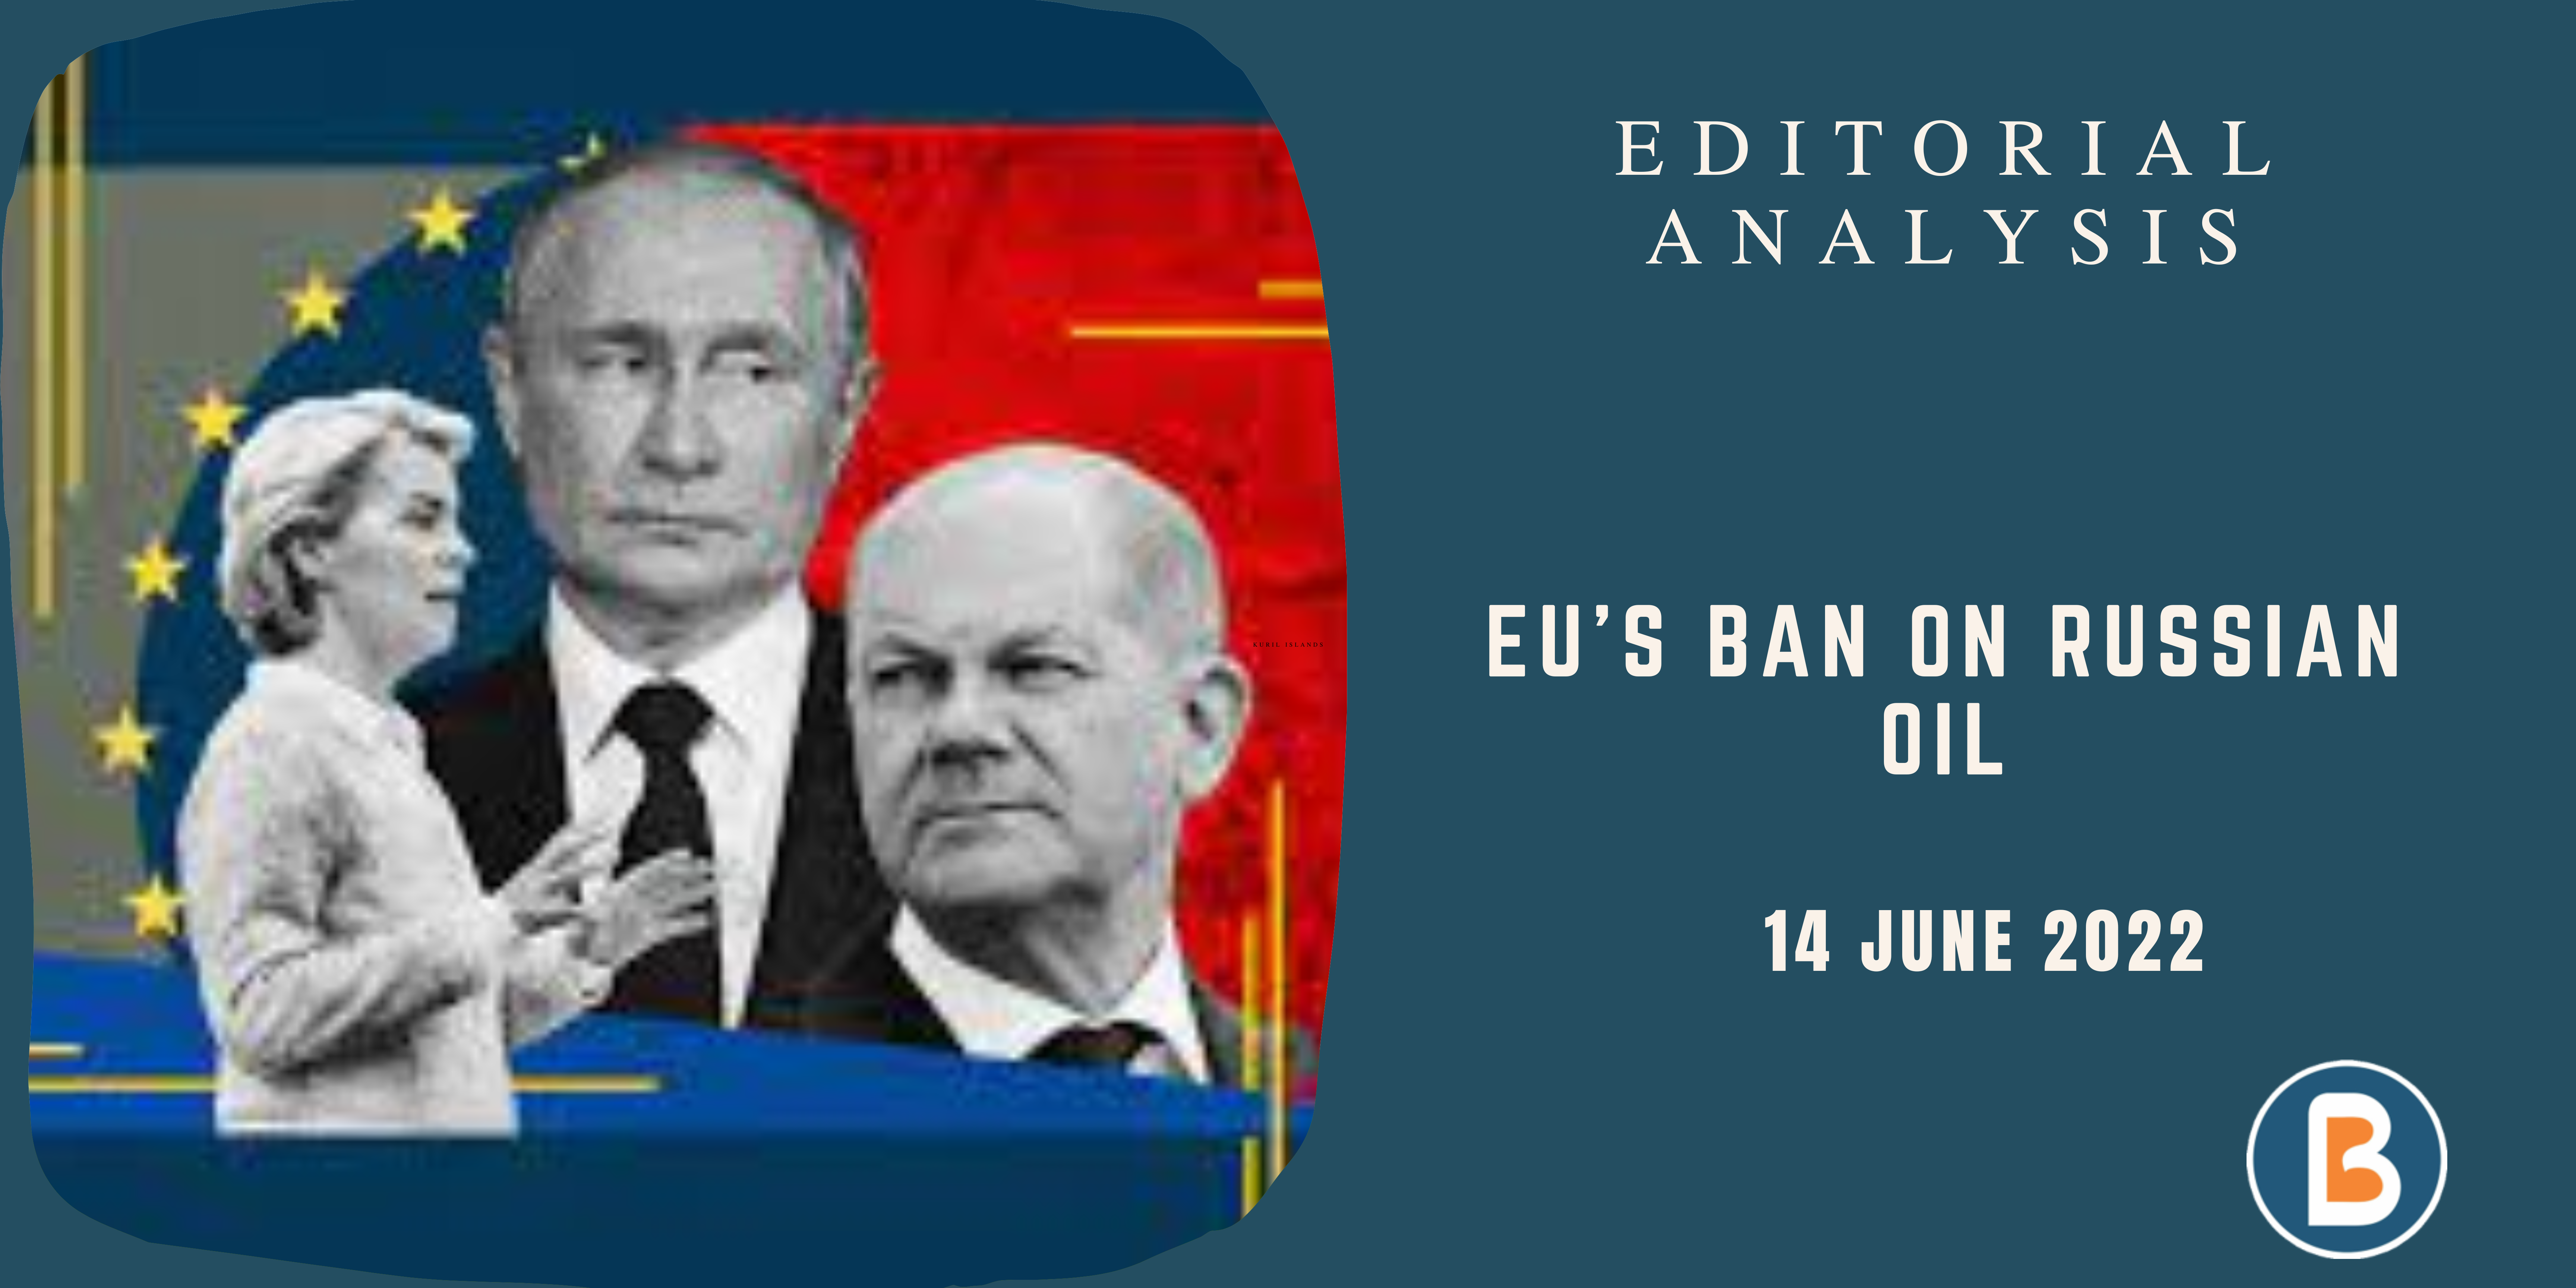 Editorial Analysis for UPSC - EU’s Ban on Russian Oil